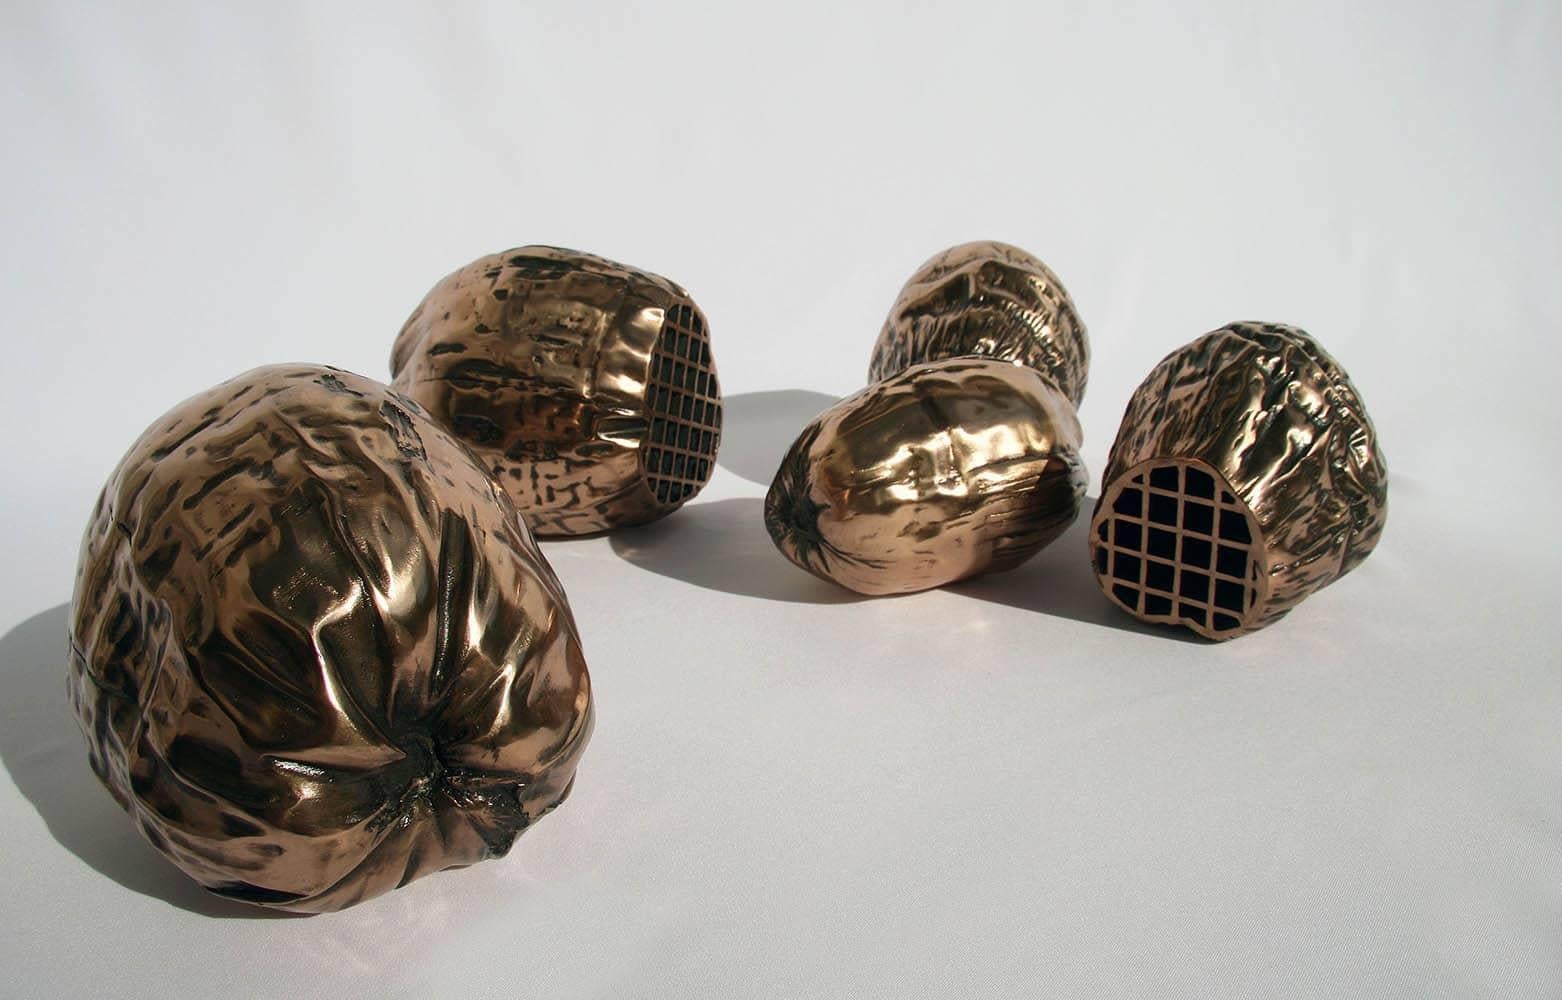 NUTS is a bronze sculpture by contemporary Czech sculptor Ondřej Oliva. The price applies for one sculpture, each measuring 15 × 22 × 15 cm (5.9 × 8.7 × 5.9 in). The set of five nuts is sold for 5040€. 
This artwork is from a limited edition of 6